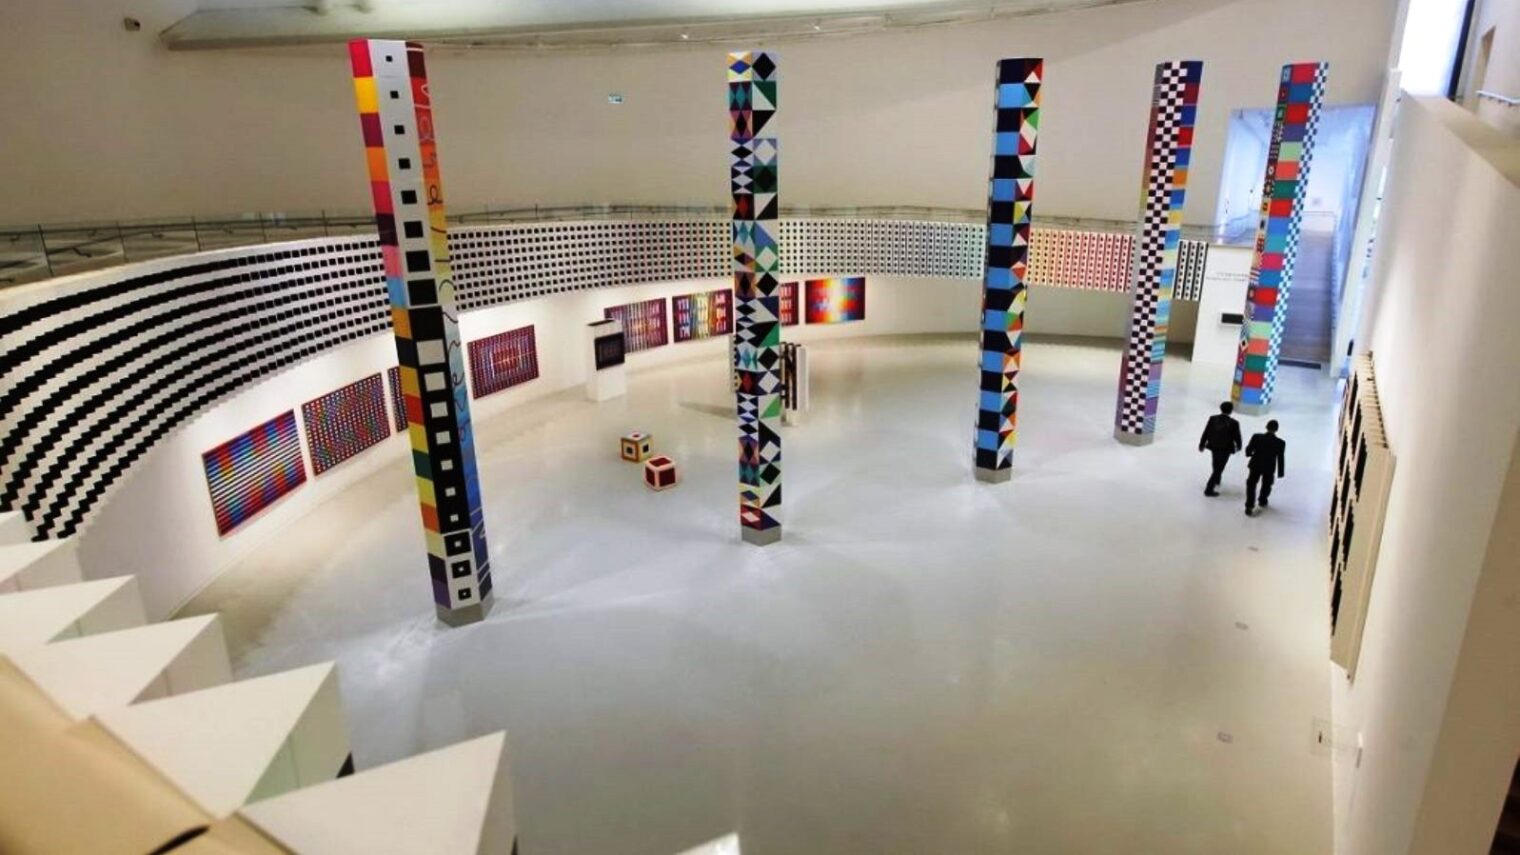 Interior of the Yaacov Agam Museum of Art in Rishon LeZion. Photo by Shooka Cohen/Park West Gallery